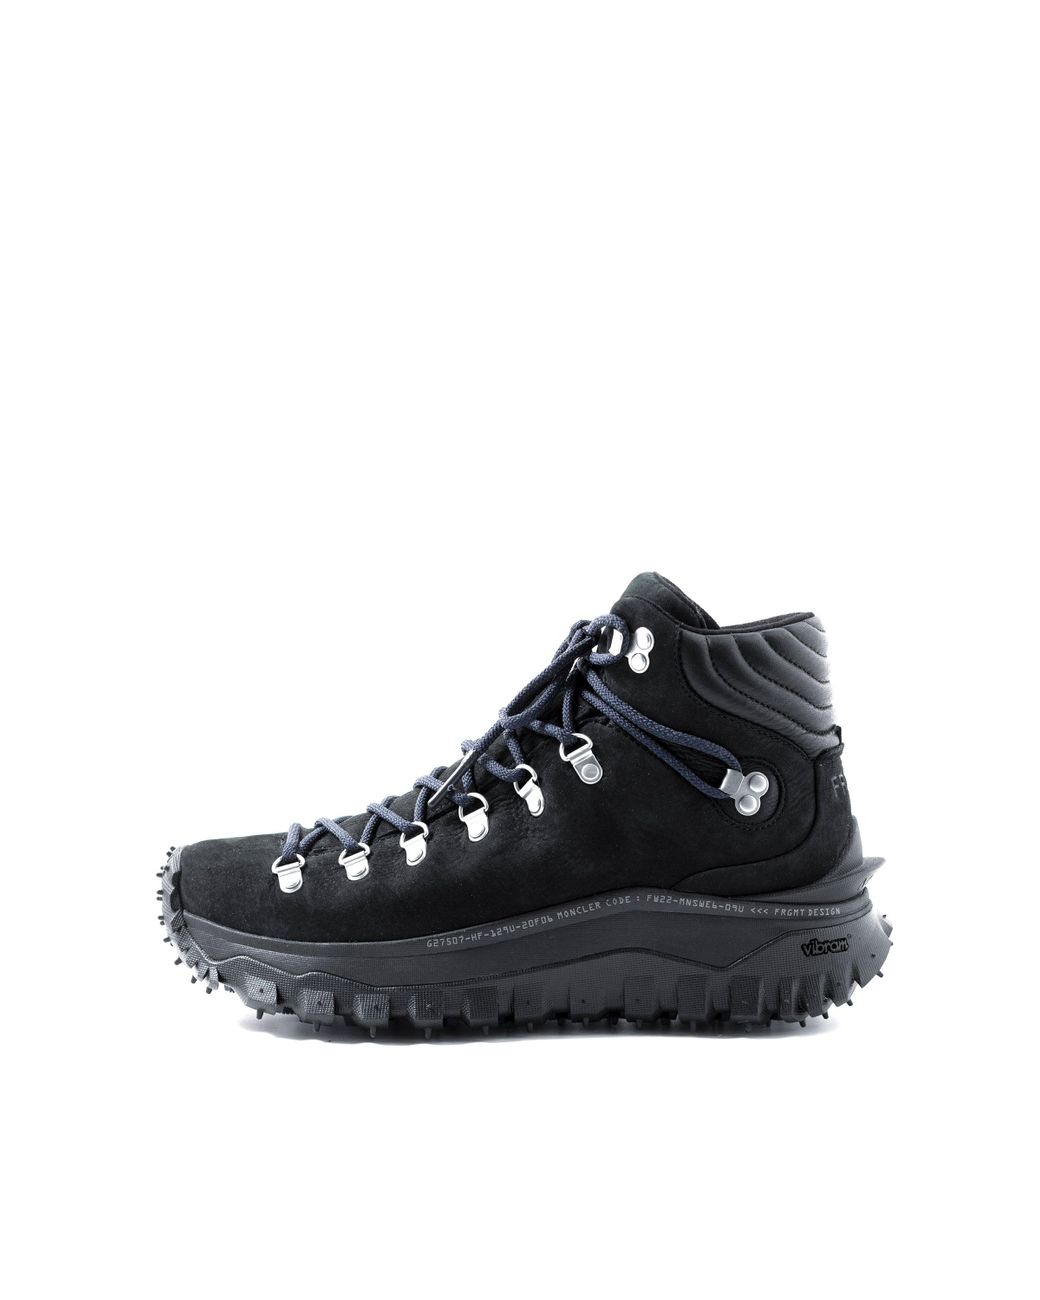 7 MONCLER FRAGMENT Trailgrip High Gtx Low Top Sneakers in Black